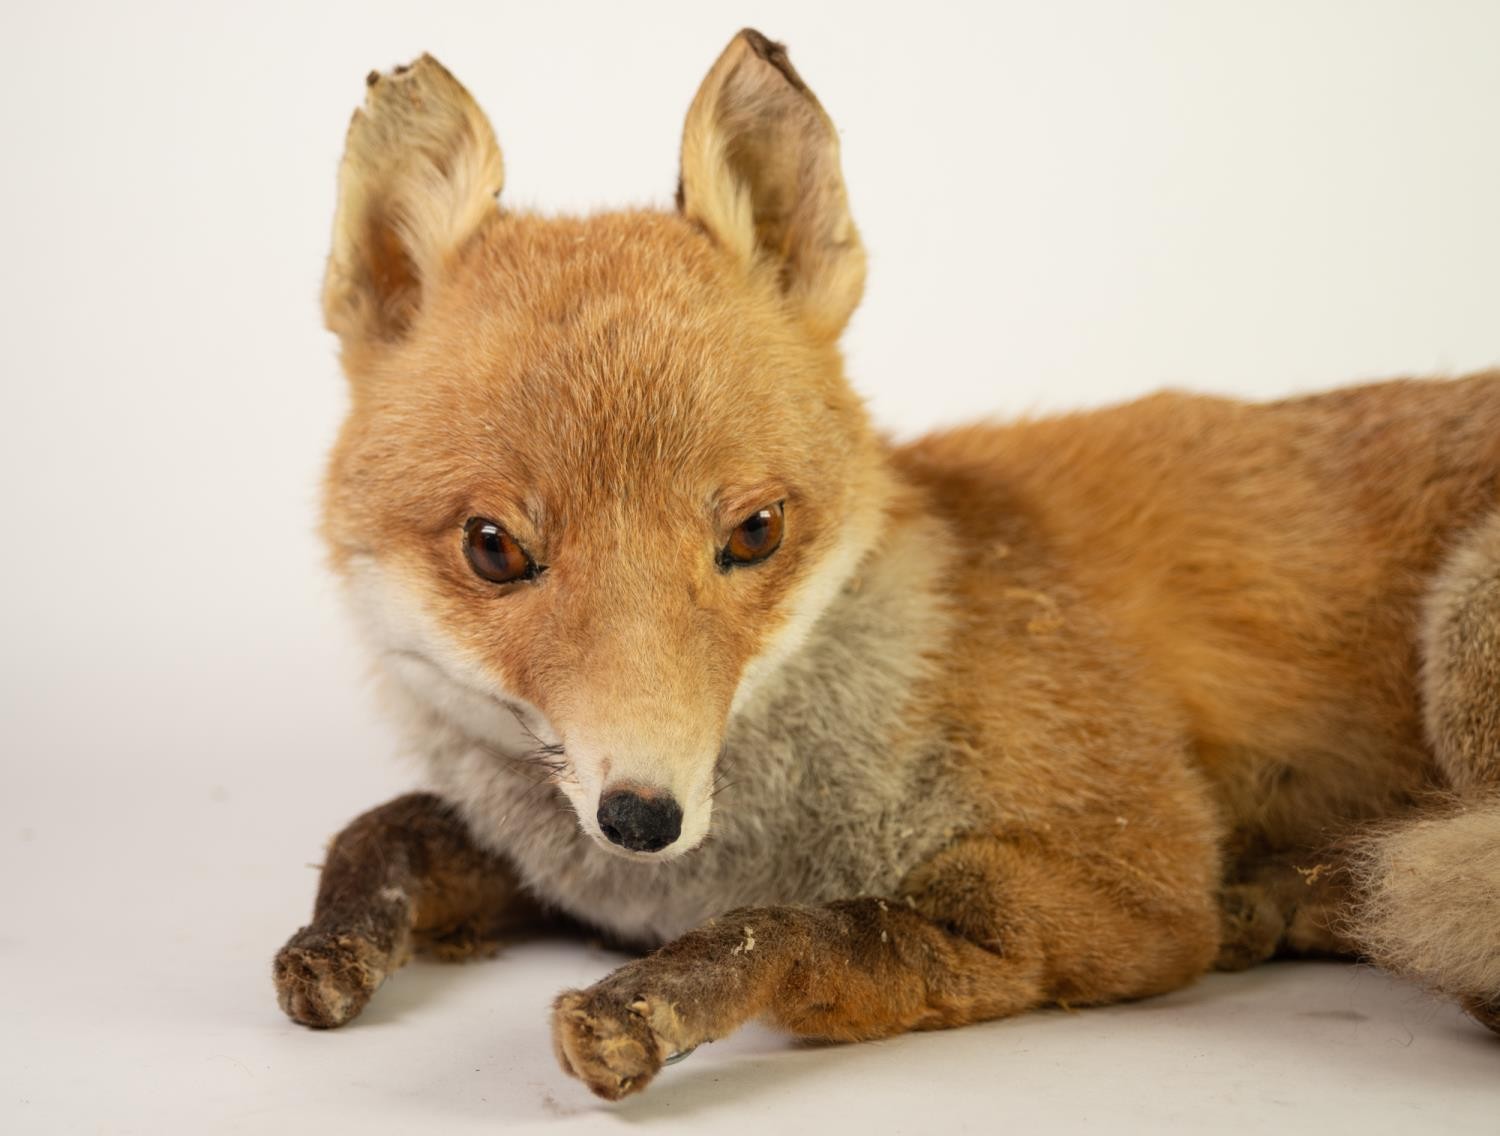 20th CENTURY TAXIDERMIC SPECIMEN OF A RECUMBENT FOX, resting loose on leaf litter ground, framed and - Image 3 of 3